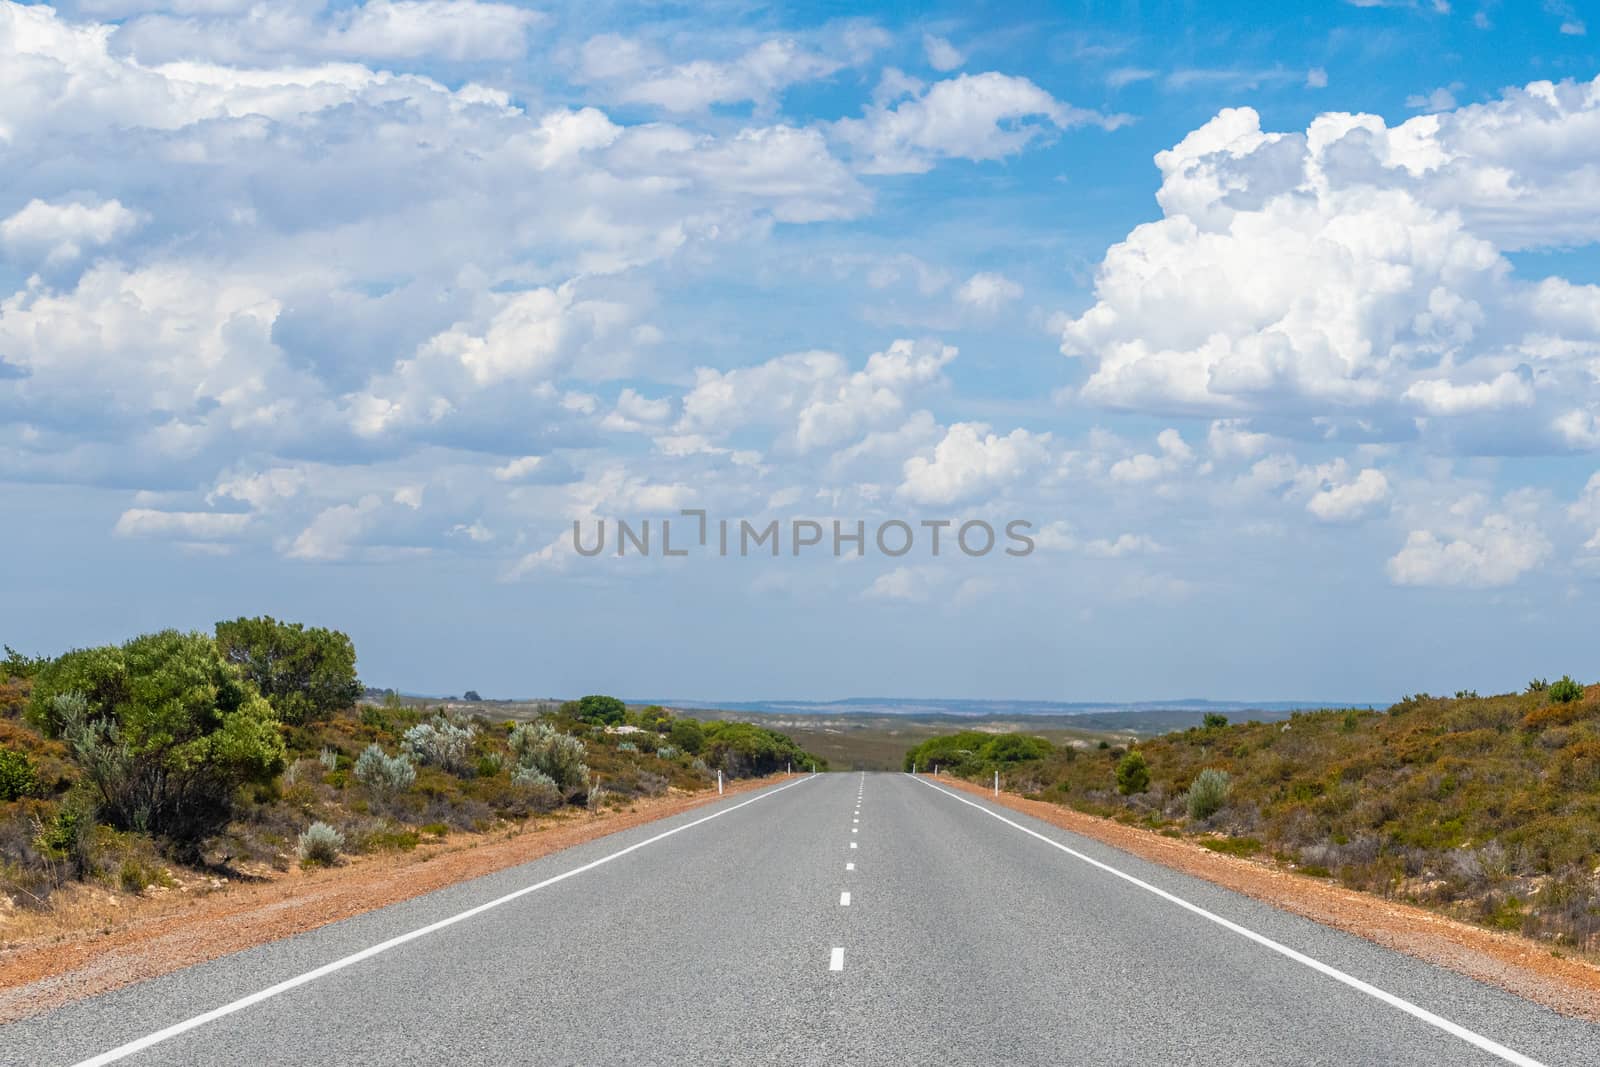 Straight and empty road close to The Pinnacles Desert Western Australia